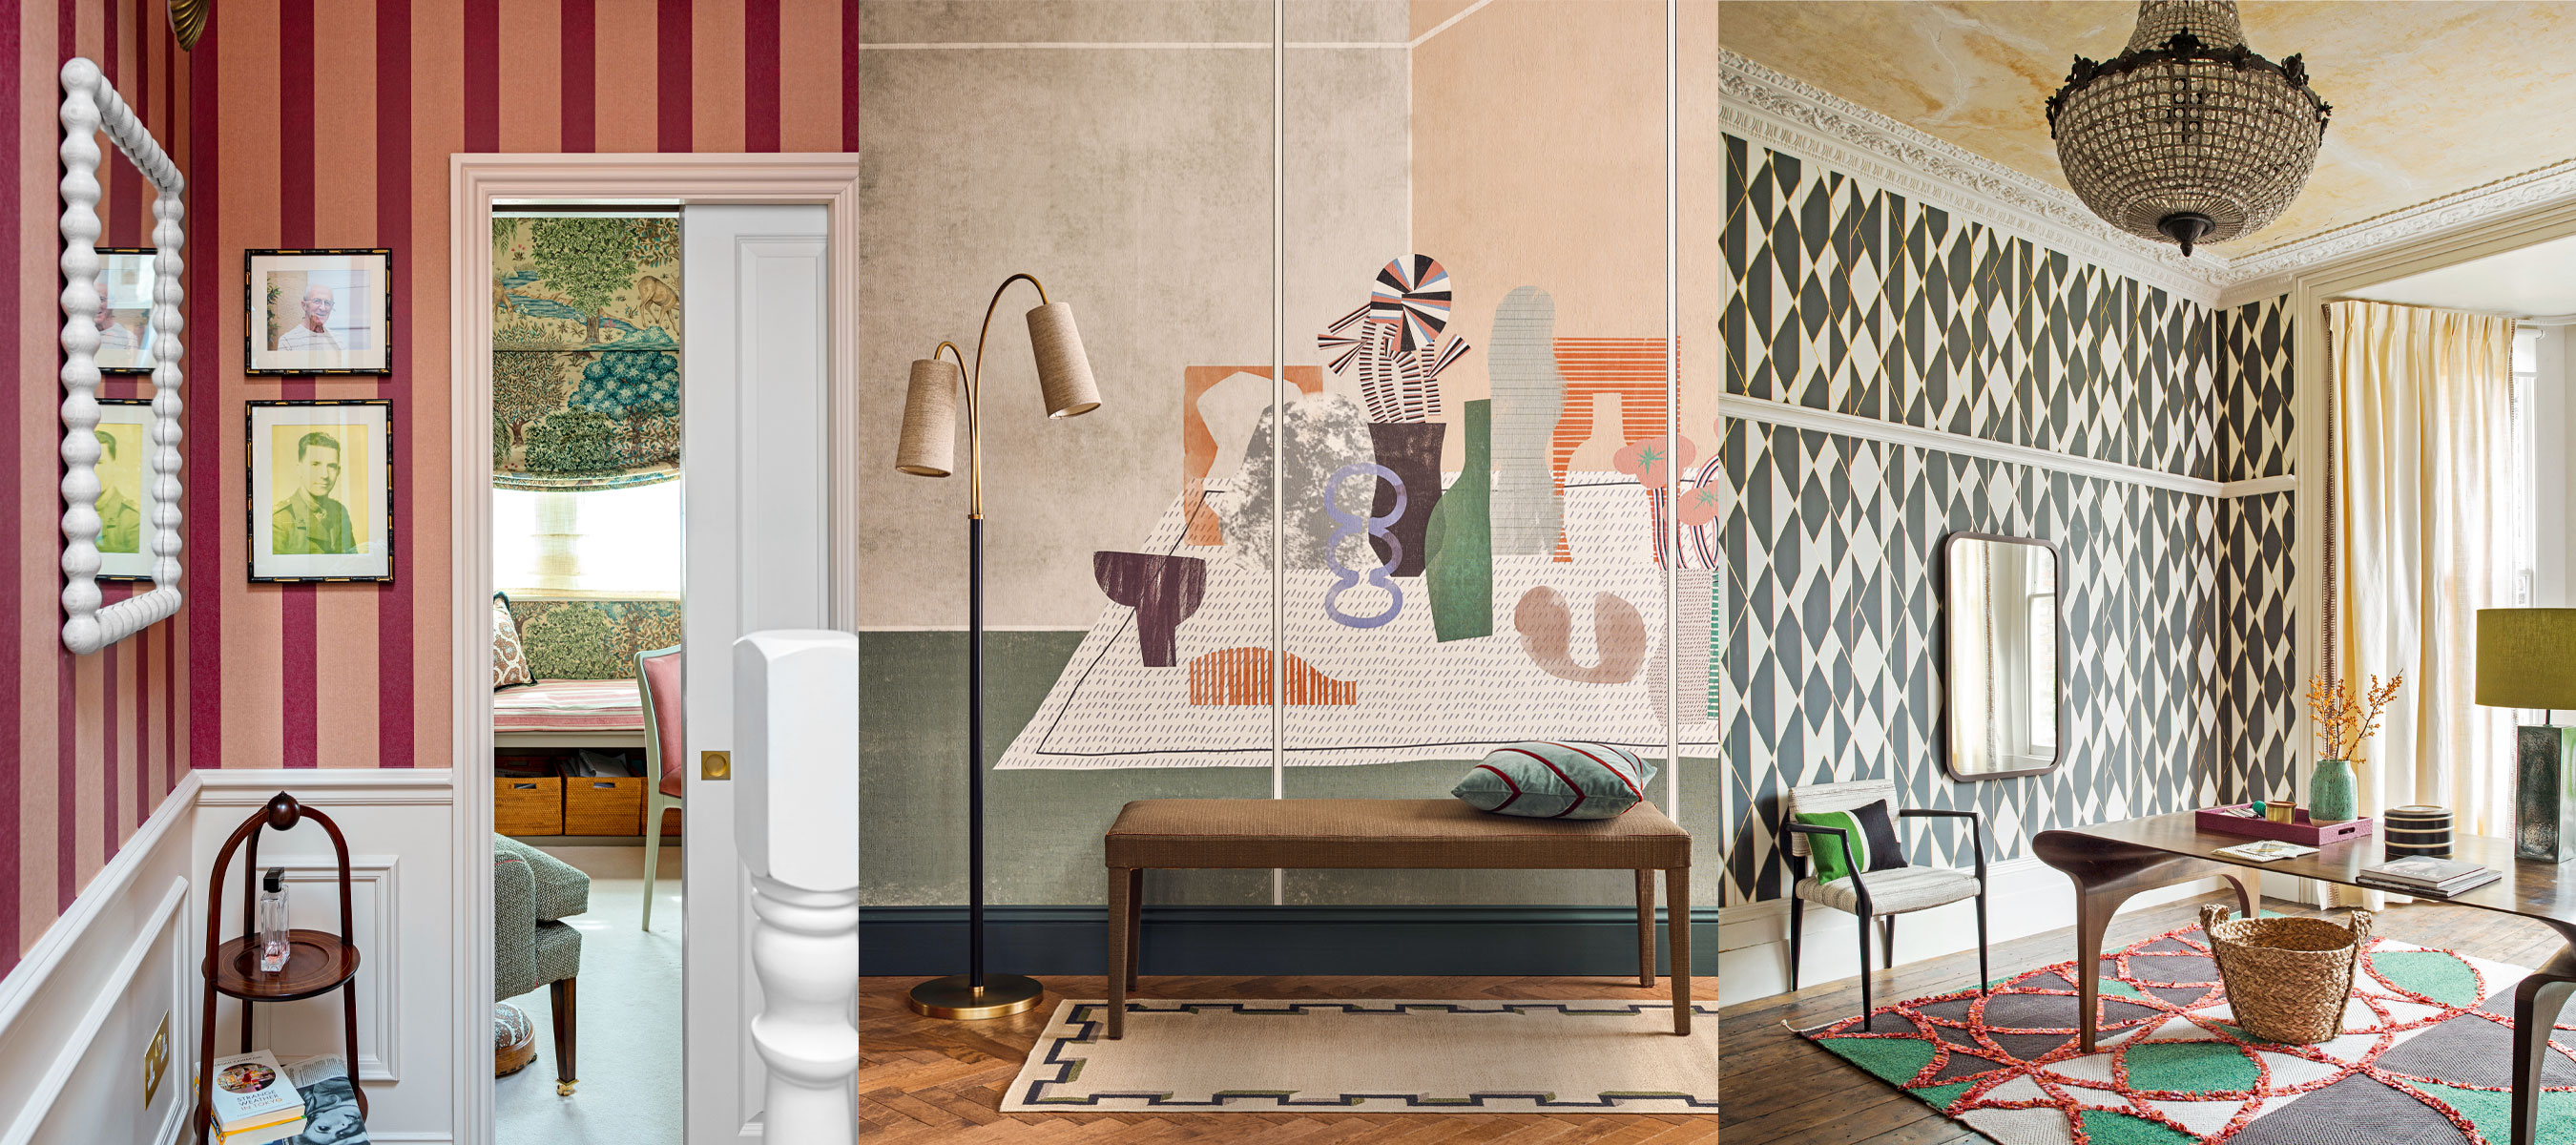 45 Bedroom Wallpaper Ideas That Will Bring Instant Beauty to Your Boudoir